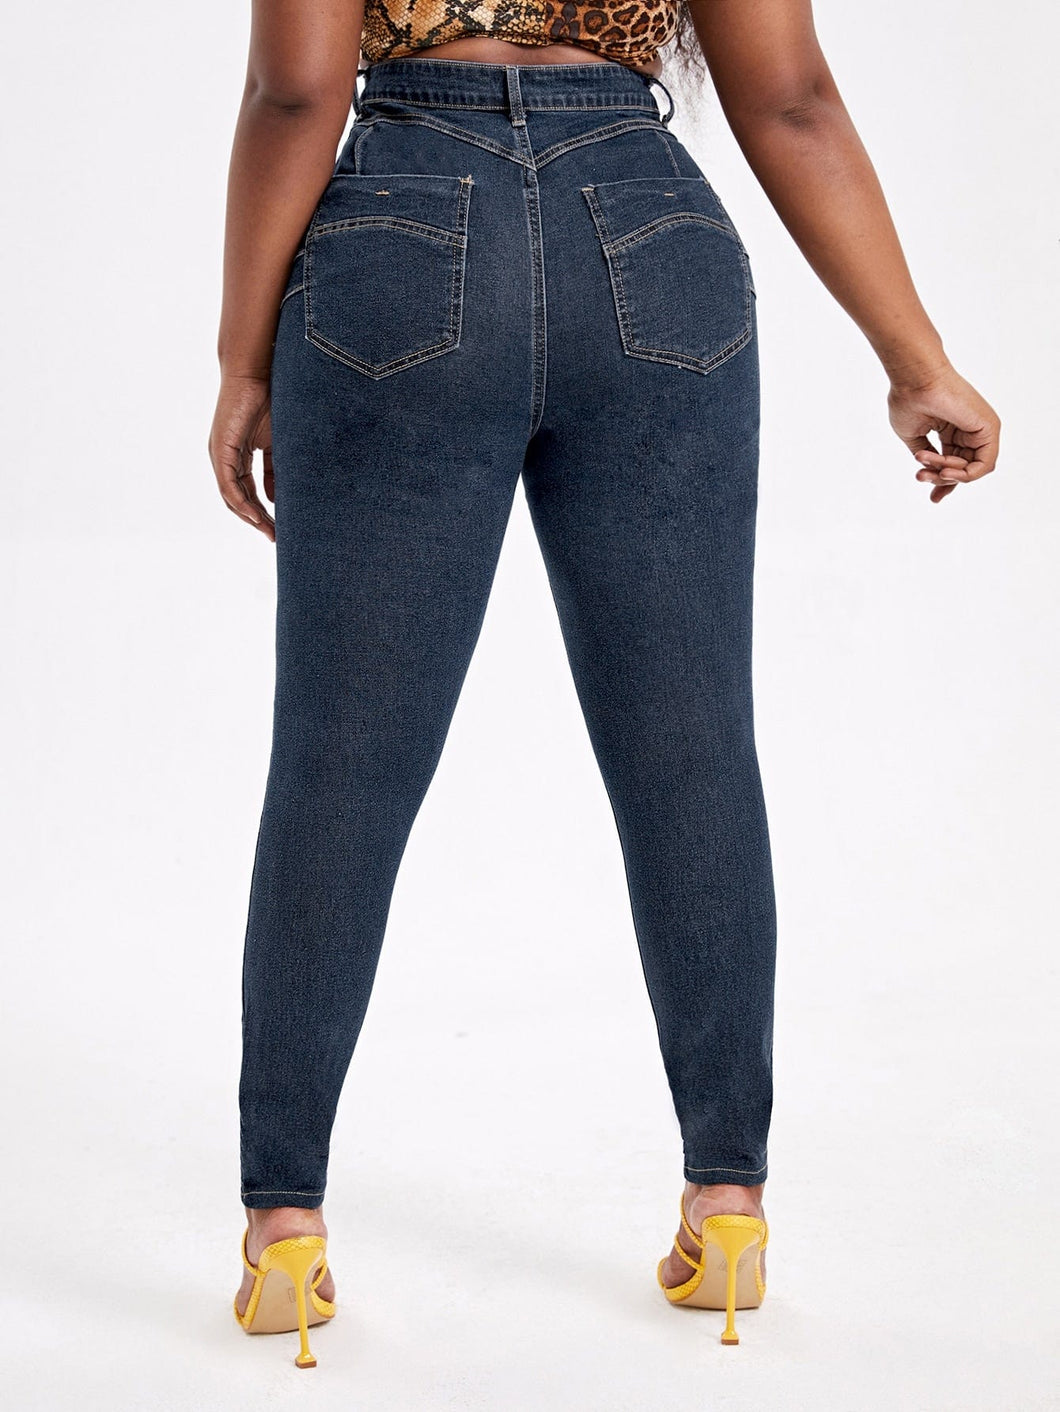 Love God. Store Large Size Jeans Dark Wash / 0XL SXY Large Curvy High Stretch Skinny Jeans price